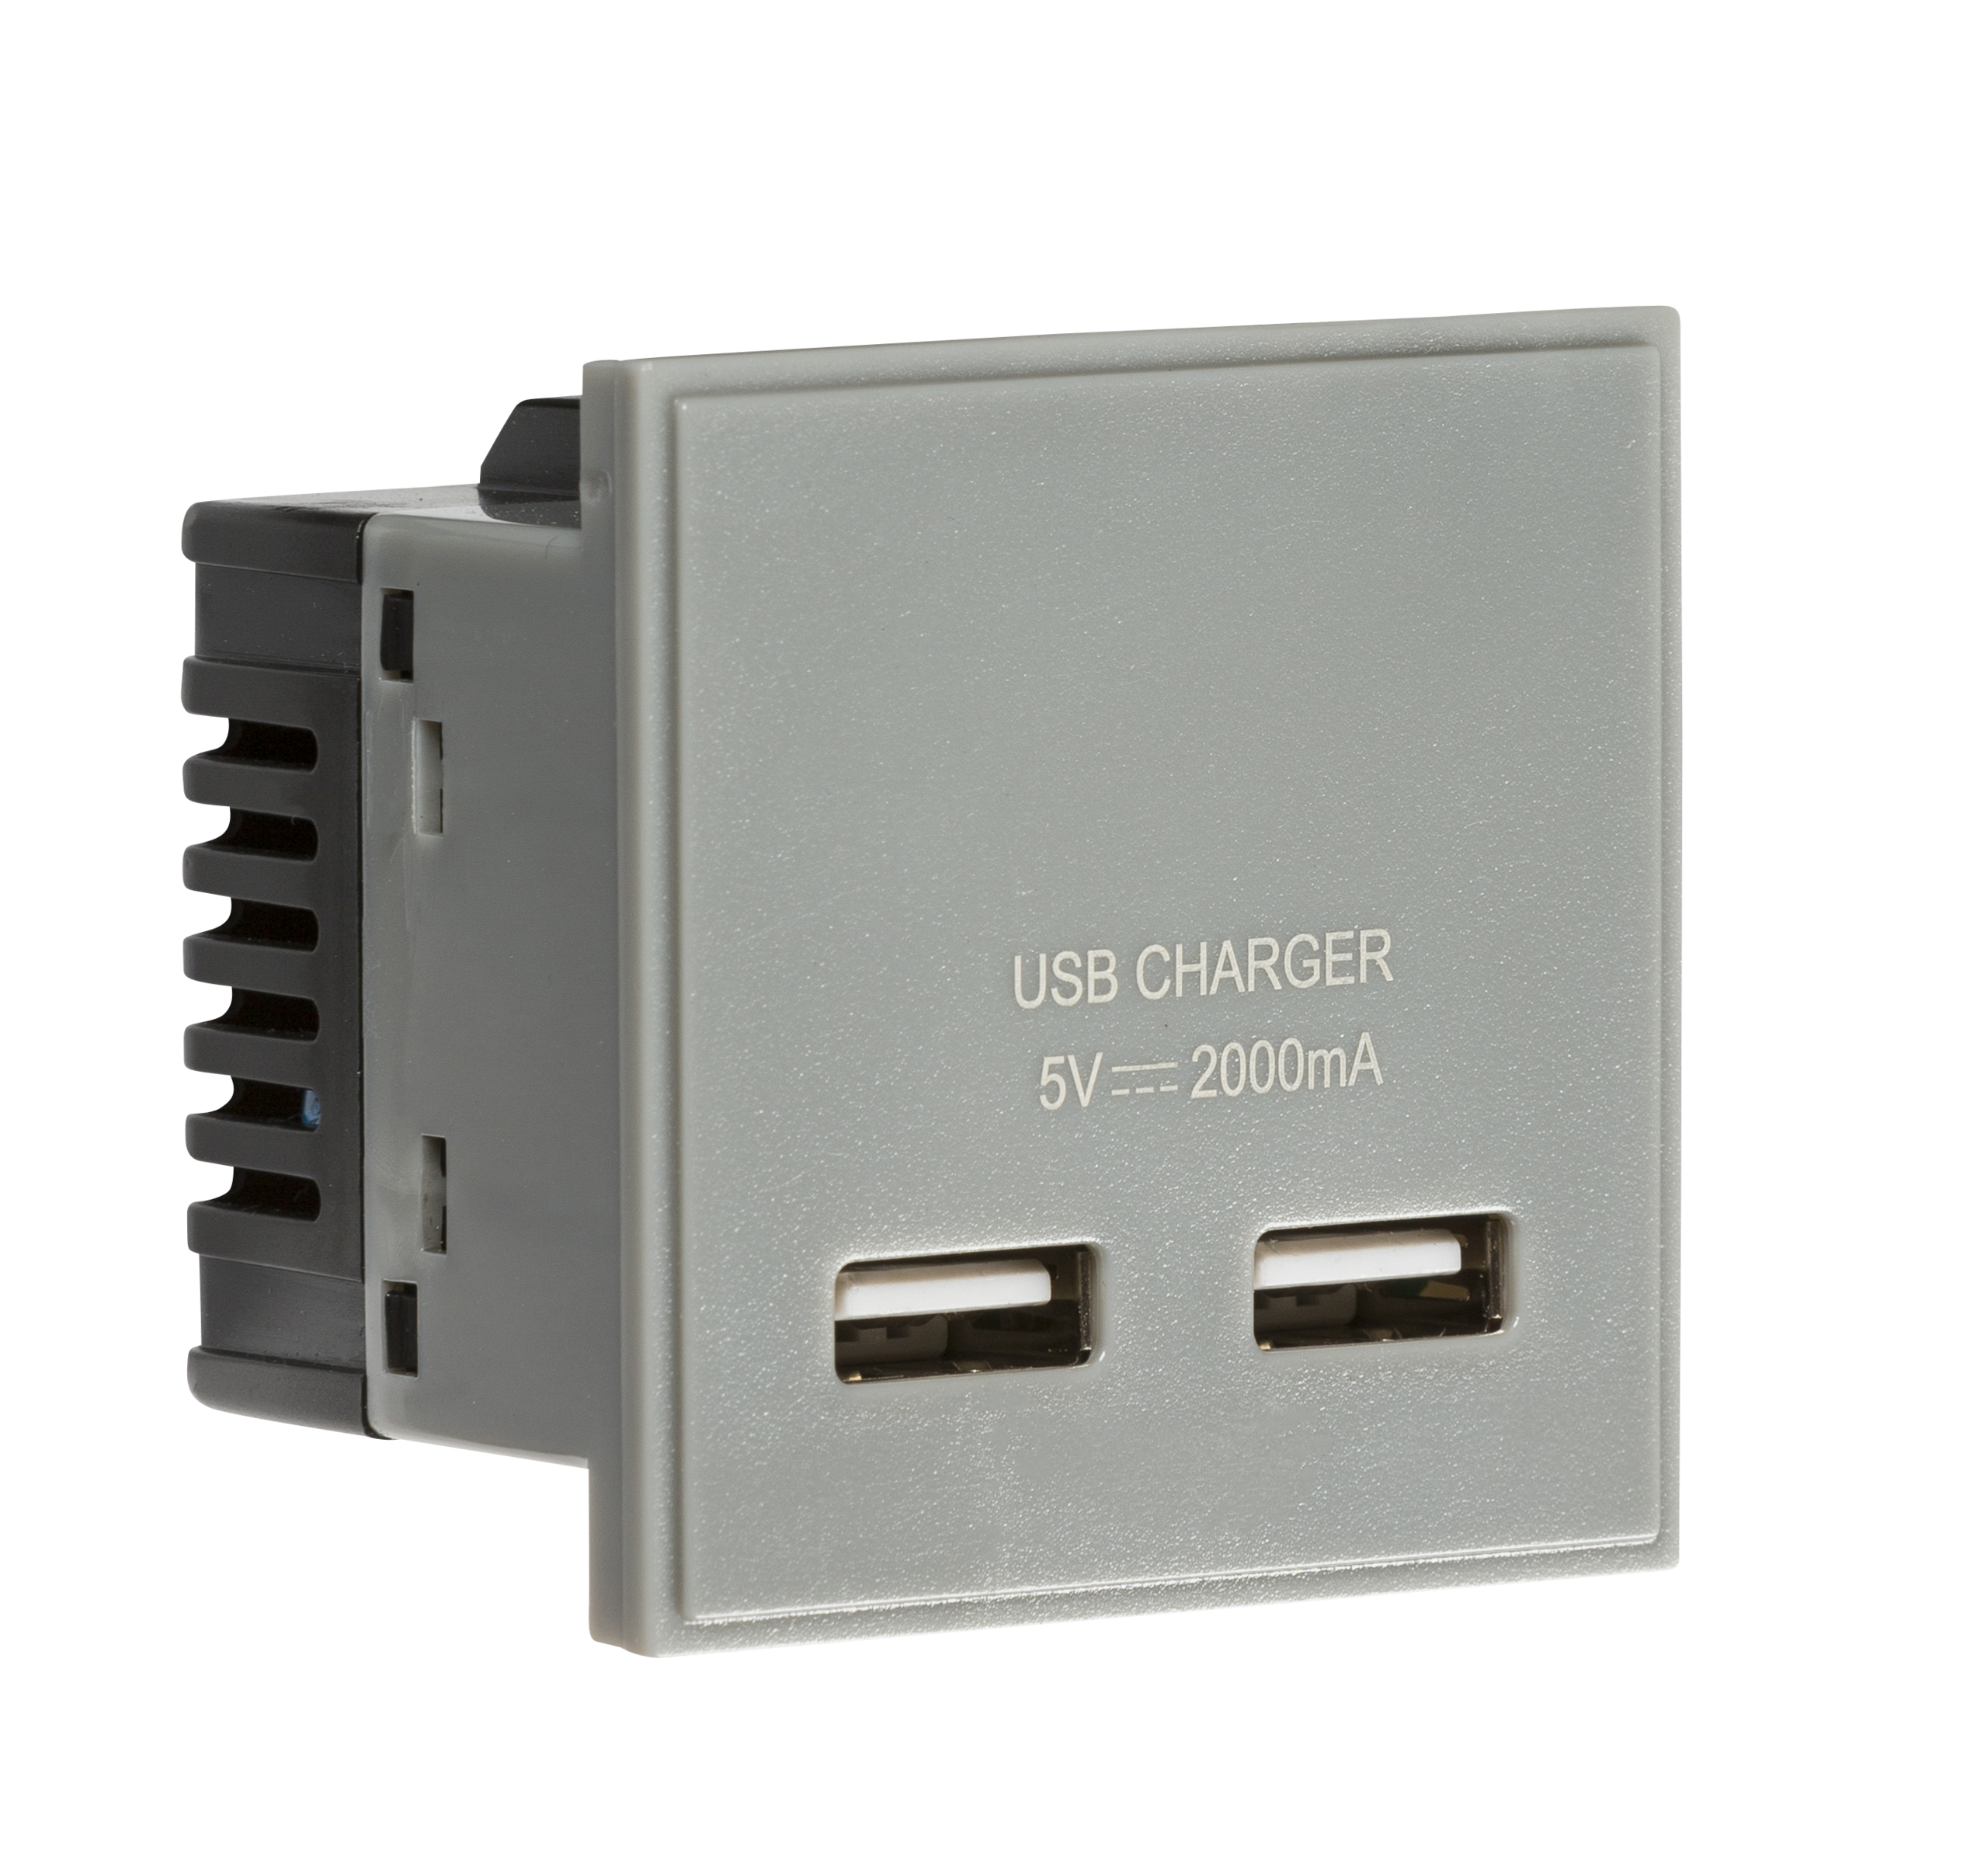 ML Accessories-NETUSBGY Dual USB charger (2A) Module 50 x 50mm - Grey